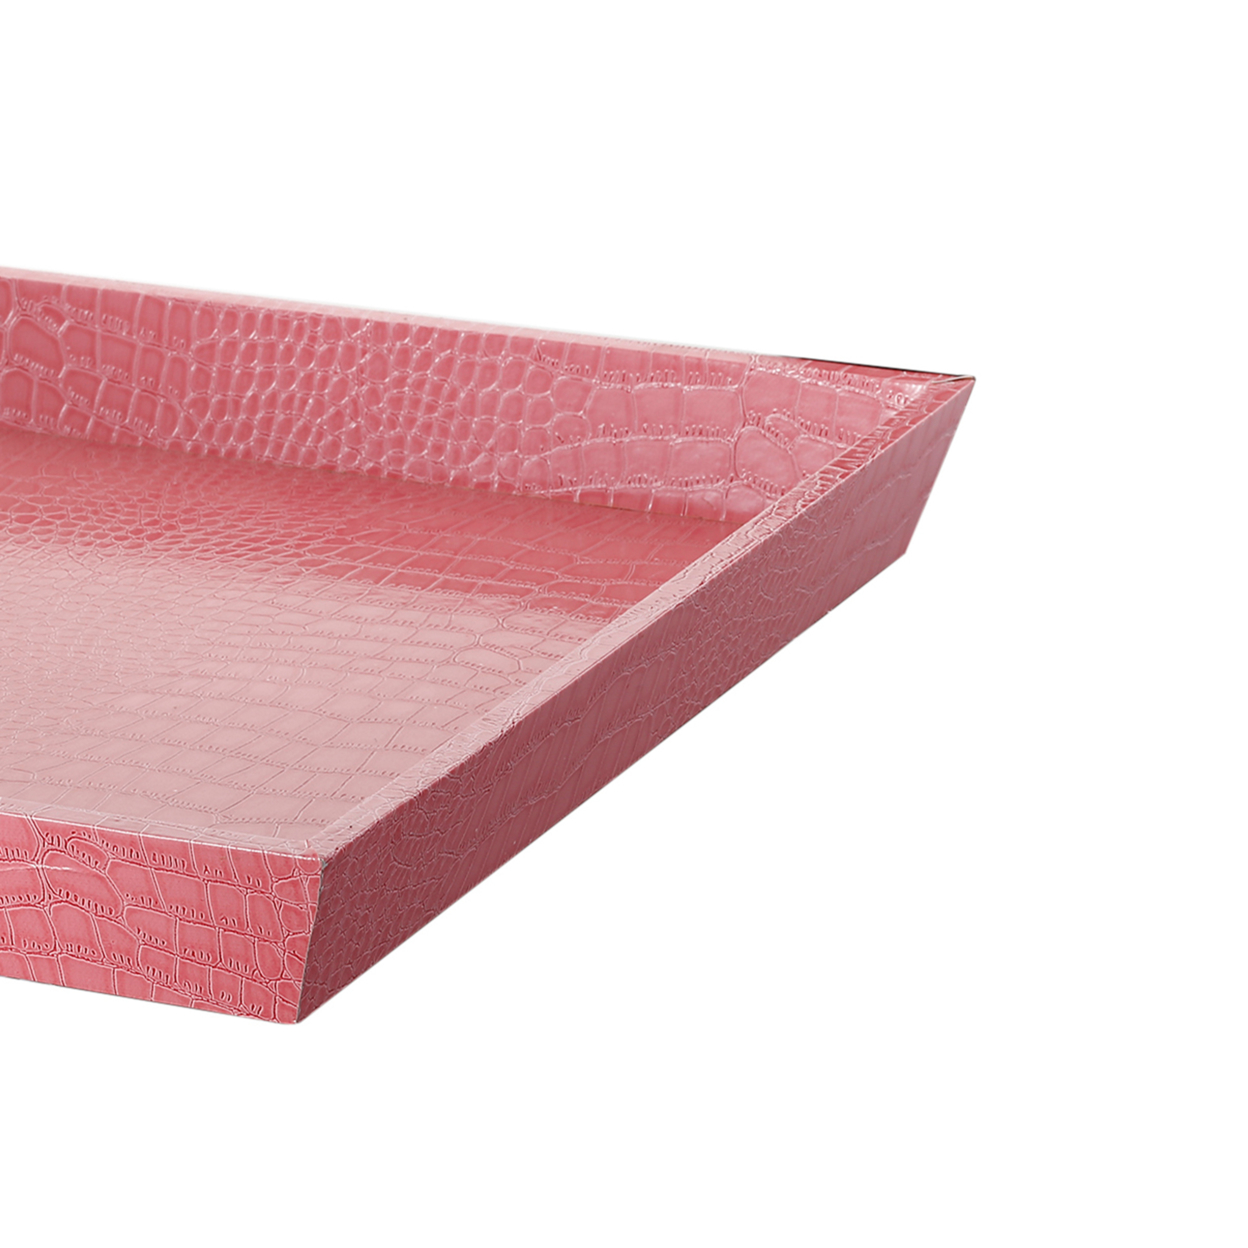 Wood And Leatherette Decorative Serving Tray With Raised Sides, Pink- Saltoro Sherpi